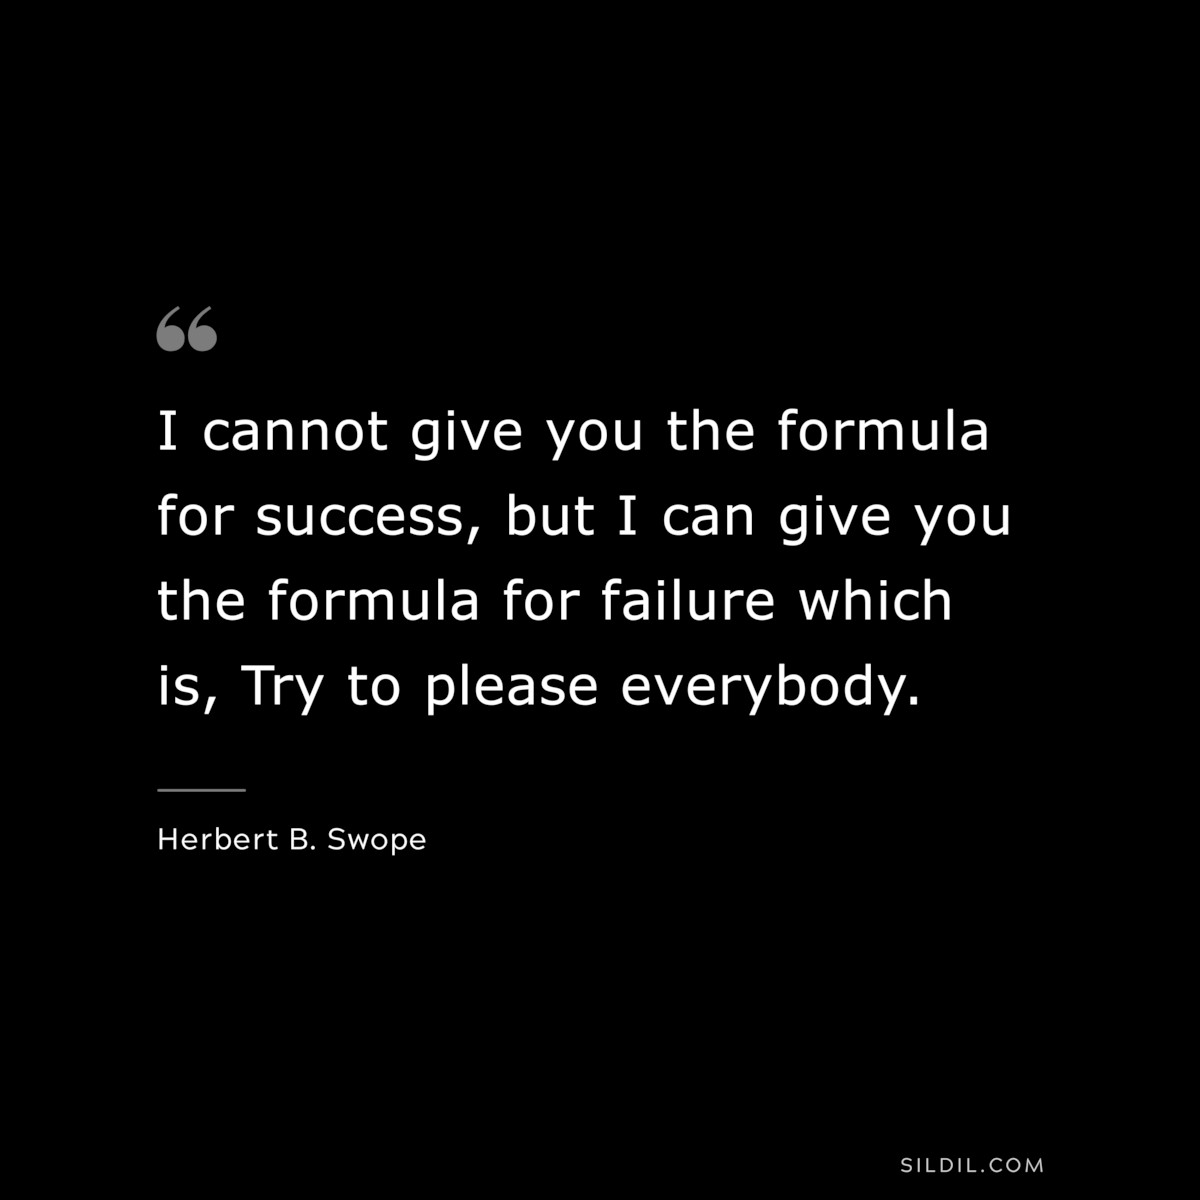 I cannot give you the formula for success, but I can give you the formula for failure which is, Try to please everybody. ― Herbert B. Swope